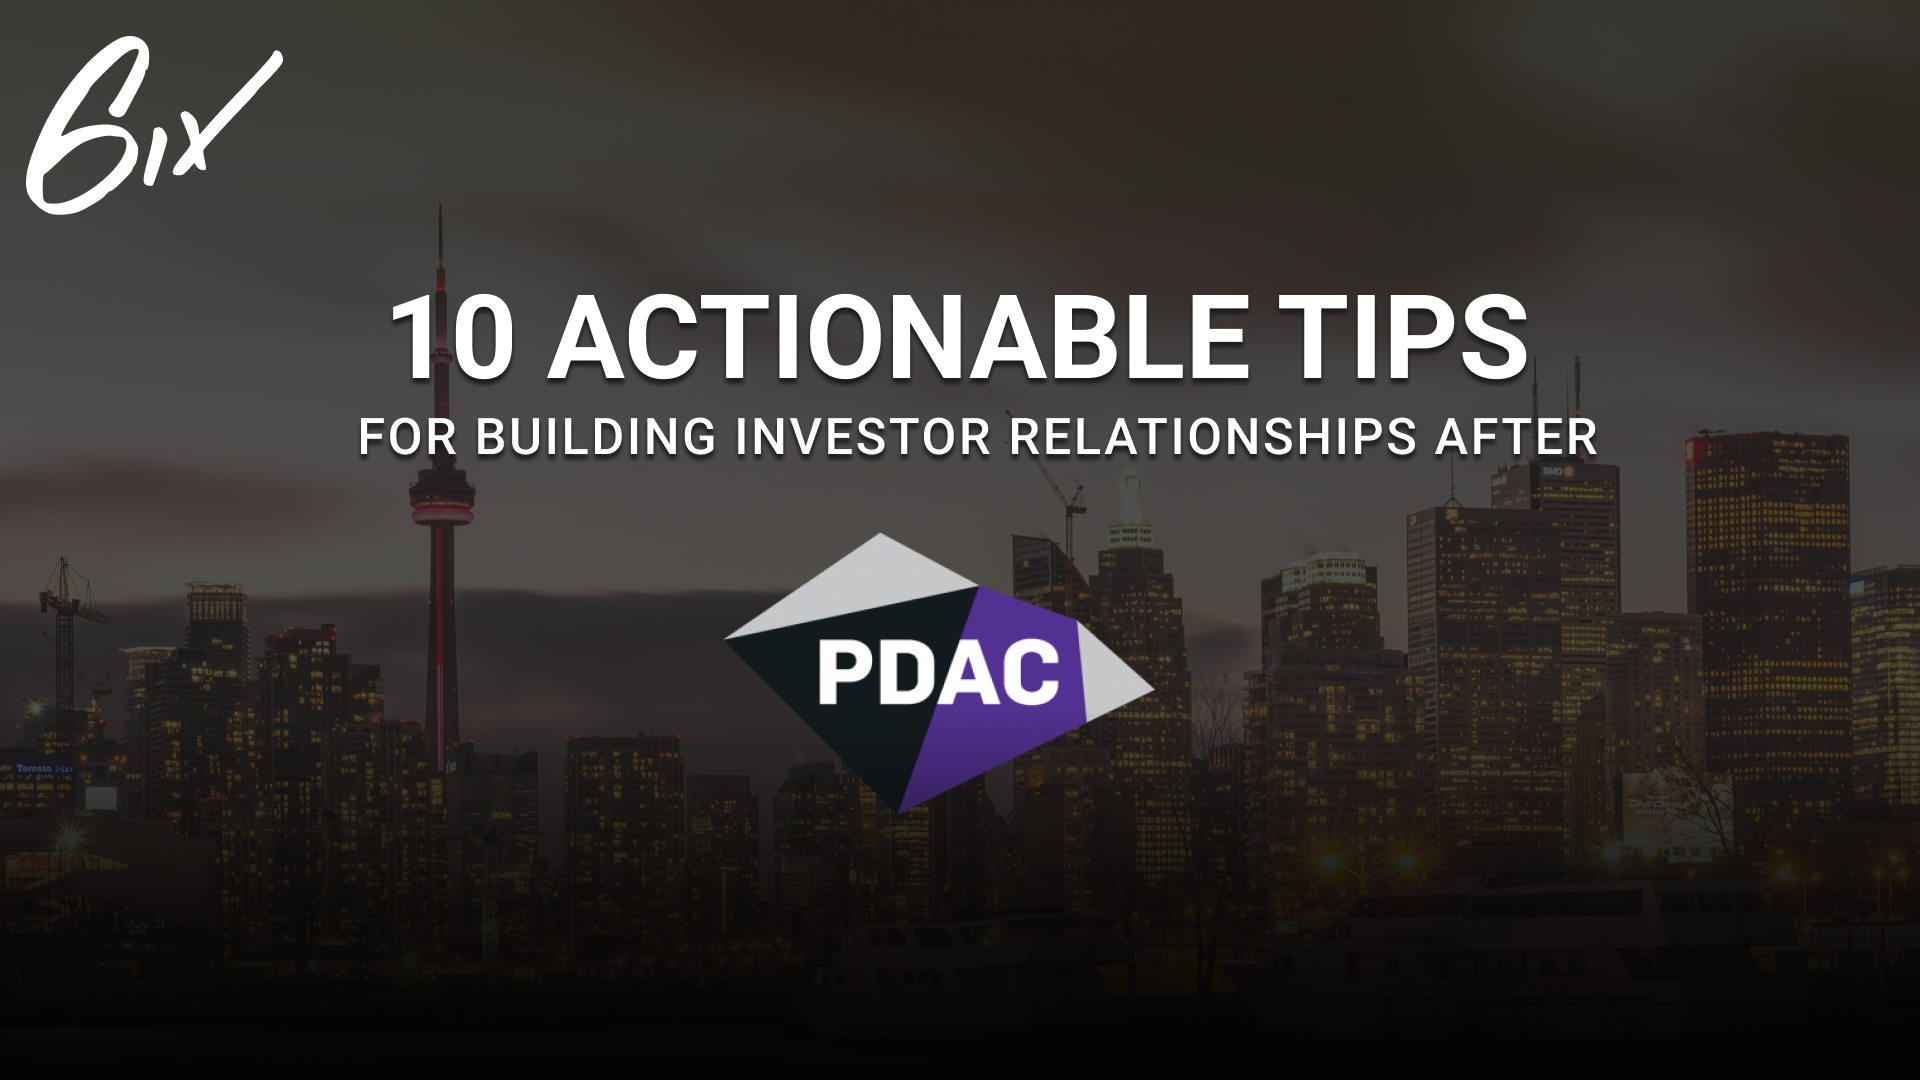 6ix Post PDAC Blog 1 - 10 Actionable Tips for Building Investor Relationships After PDAC